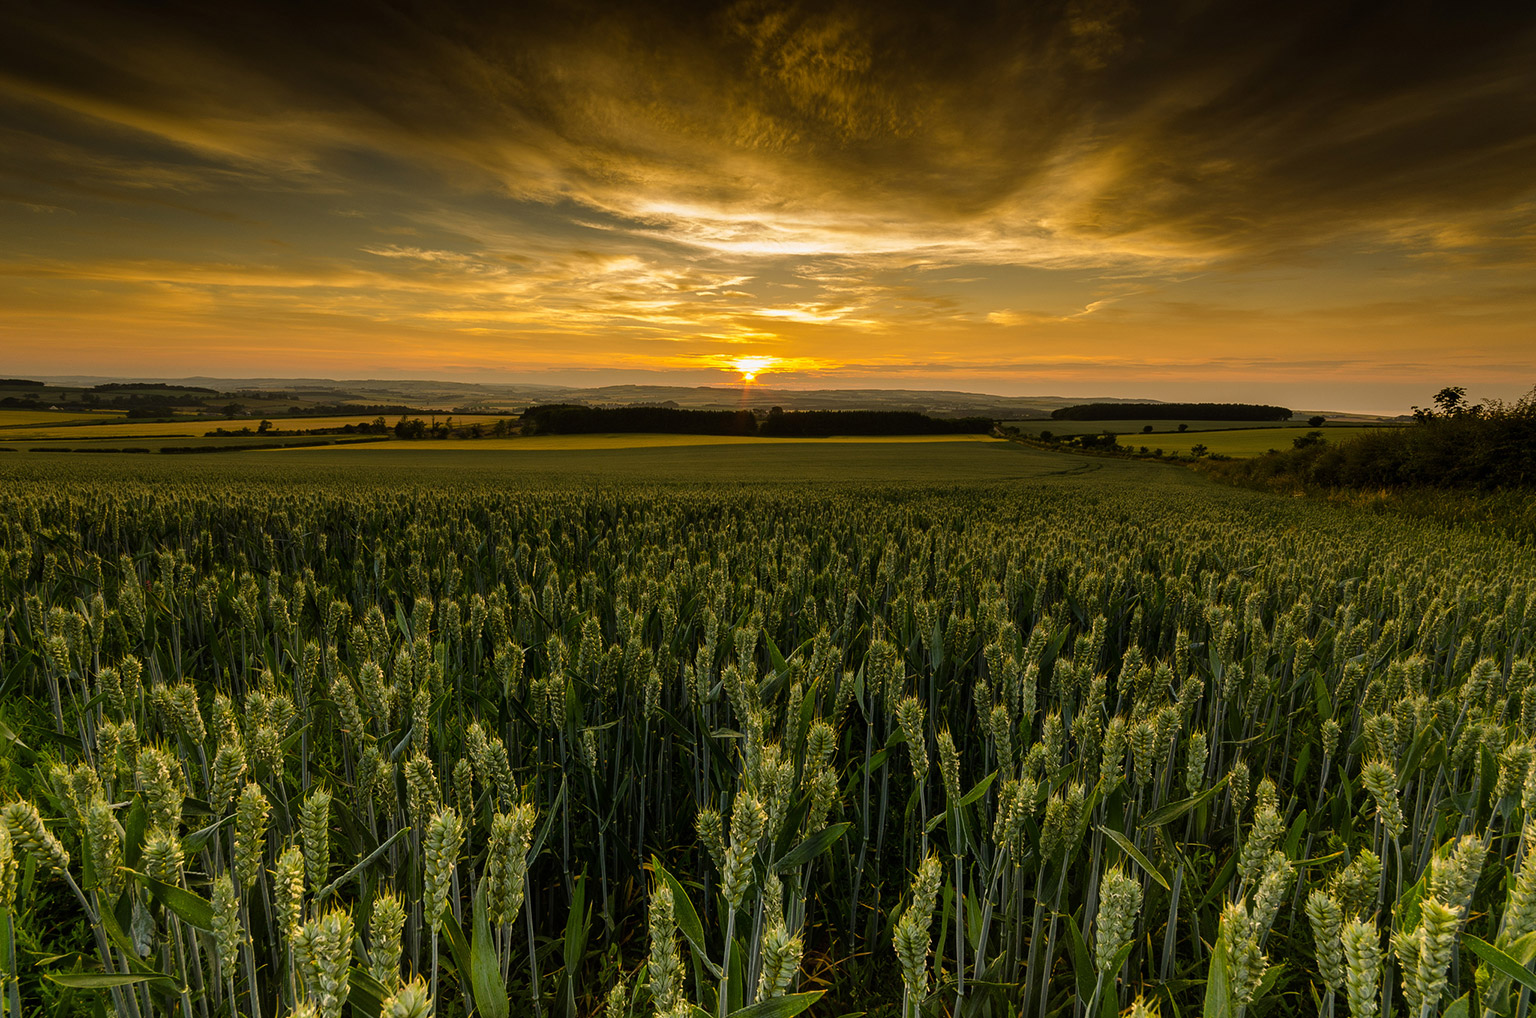 Sunset over the wheat fields of Scotland